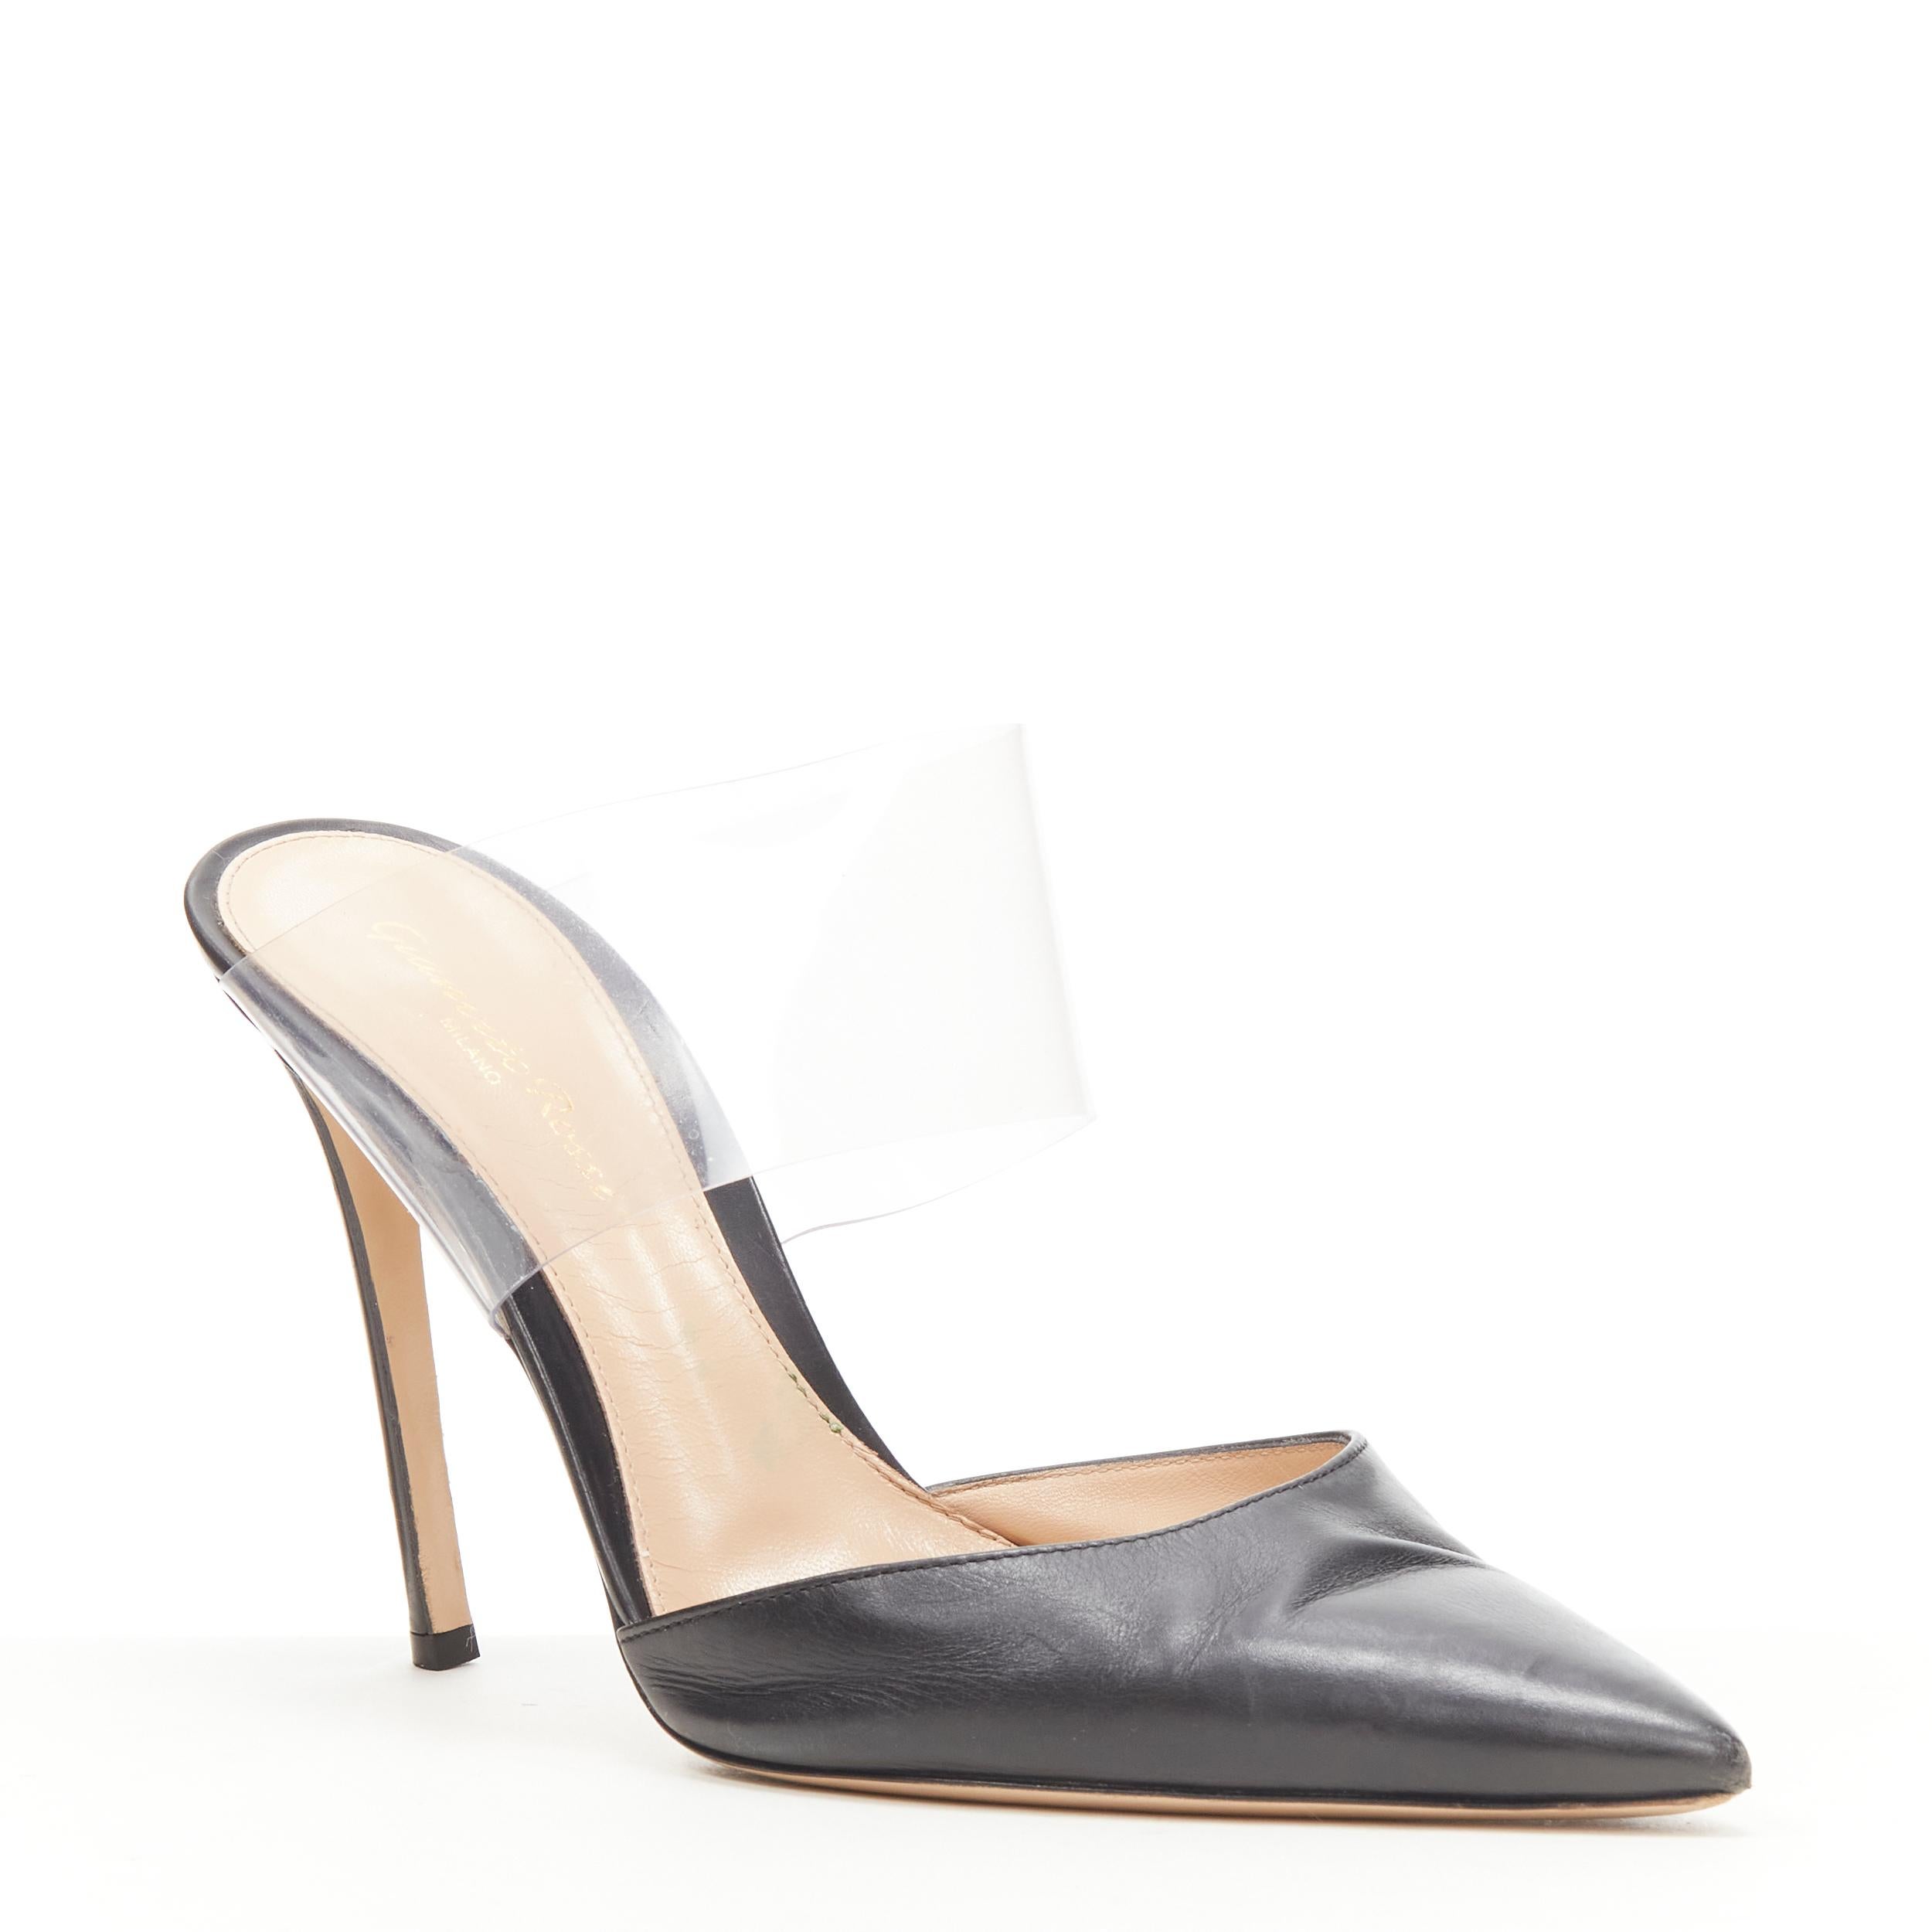 GIANVITO ROSSI Plexi black leather toe clear PVC mule heel EU39 US9 
Reference: KEDG/A00142 
Brand: Gianvito Rossi 
Model: Plexi mule 
Material: Leather 
Color: Black 
Extra Detail: Leather toe. PVC strap across across vamp. 
Made in: Italy